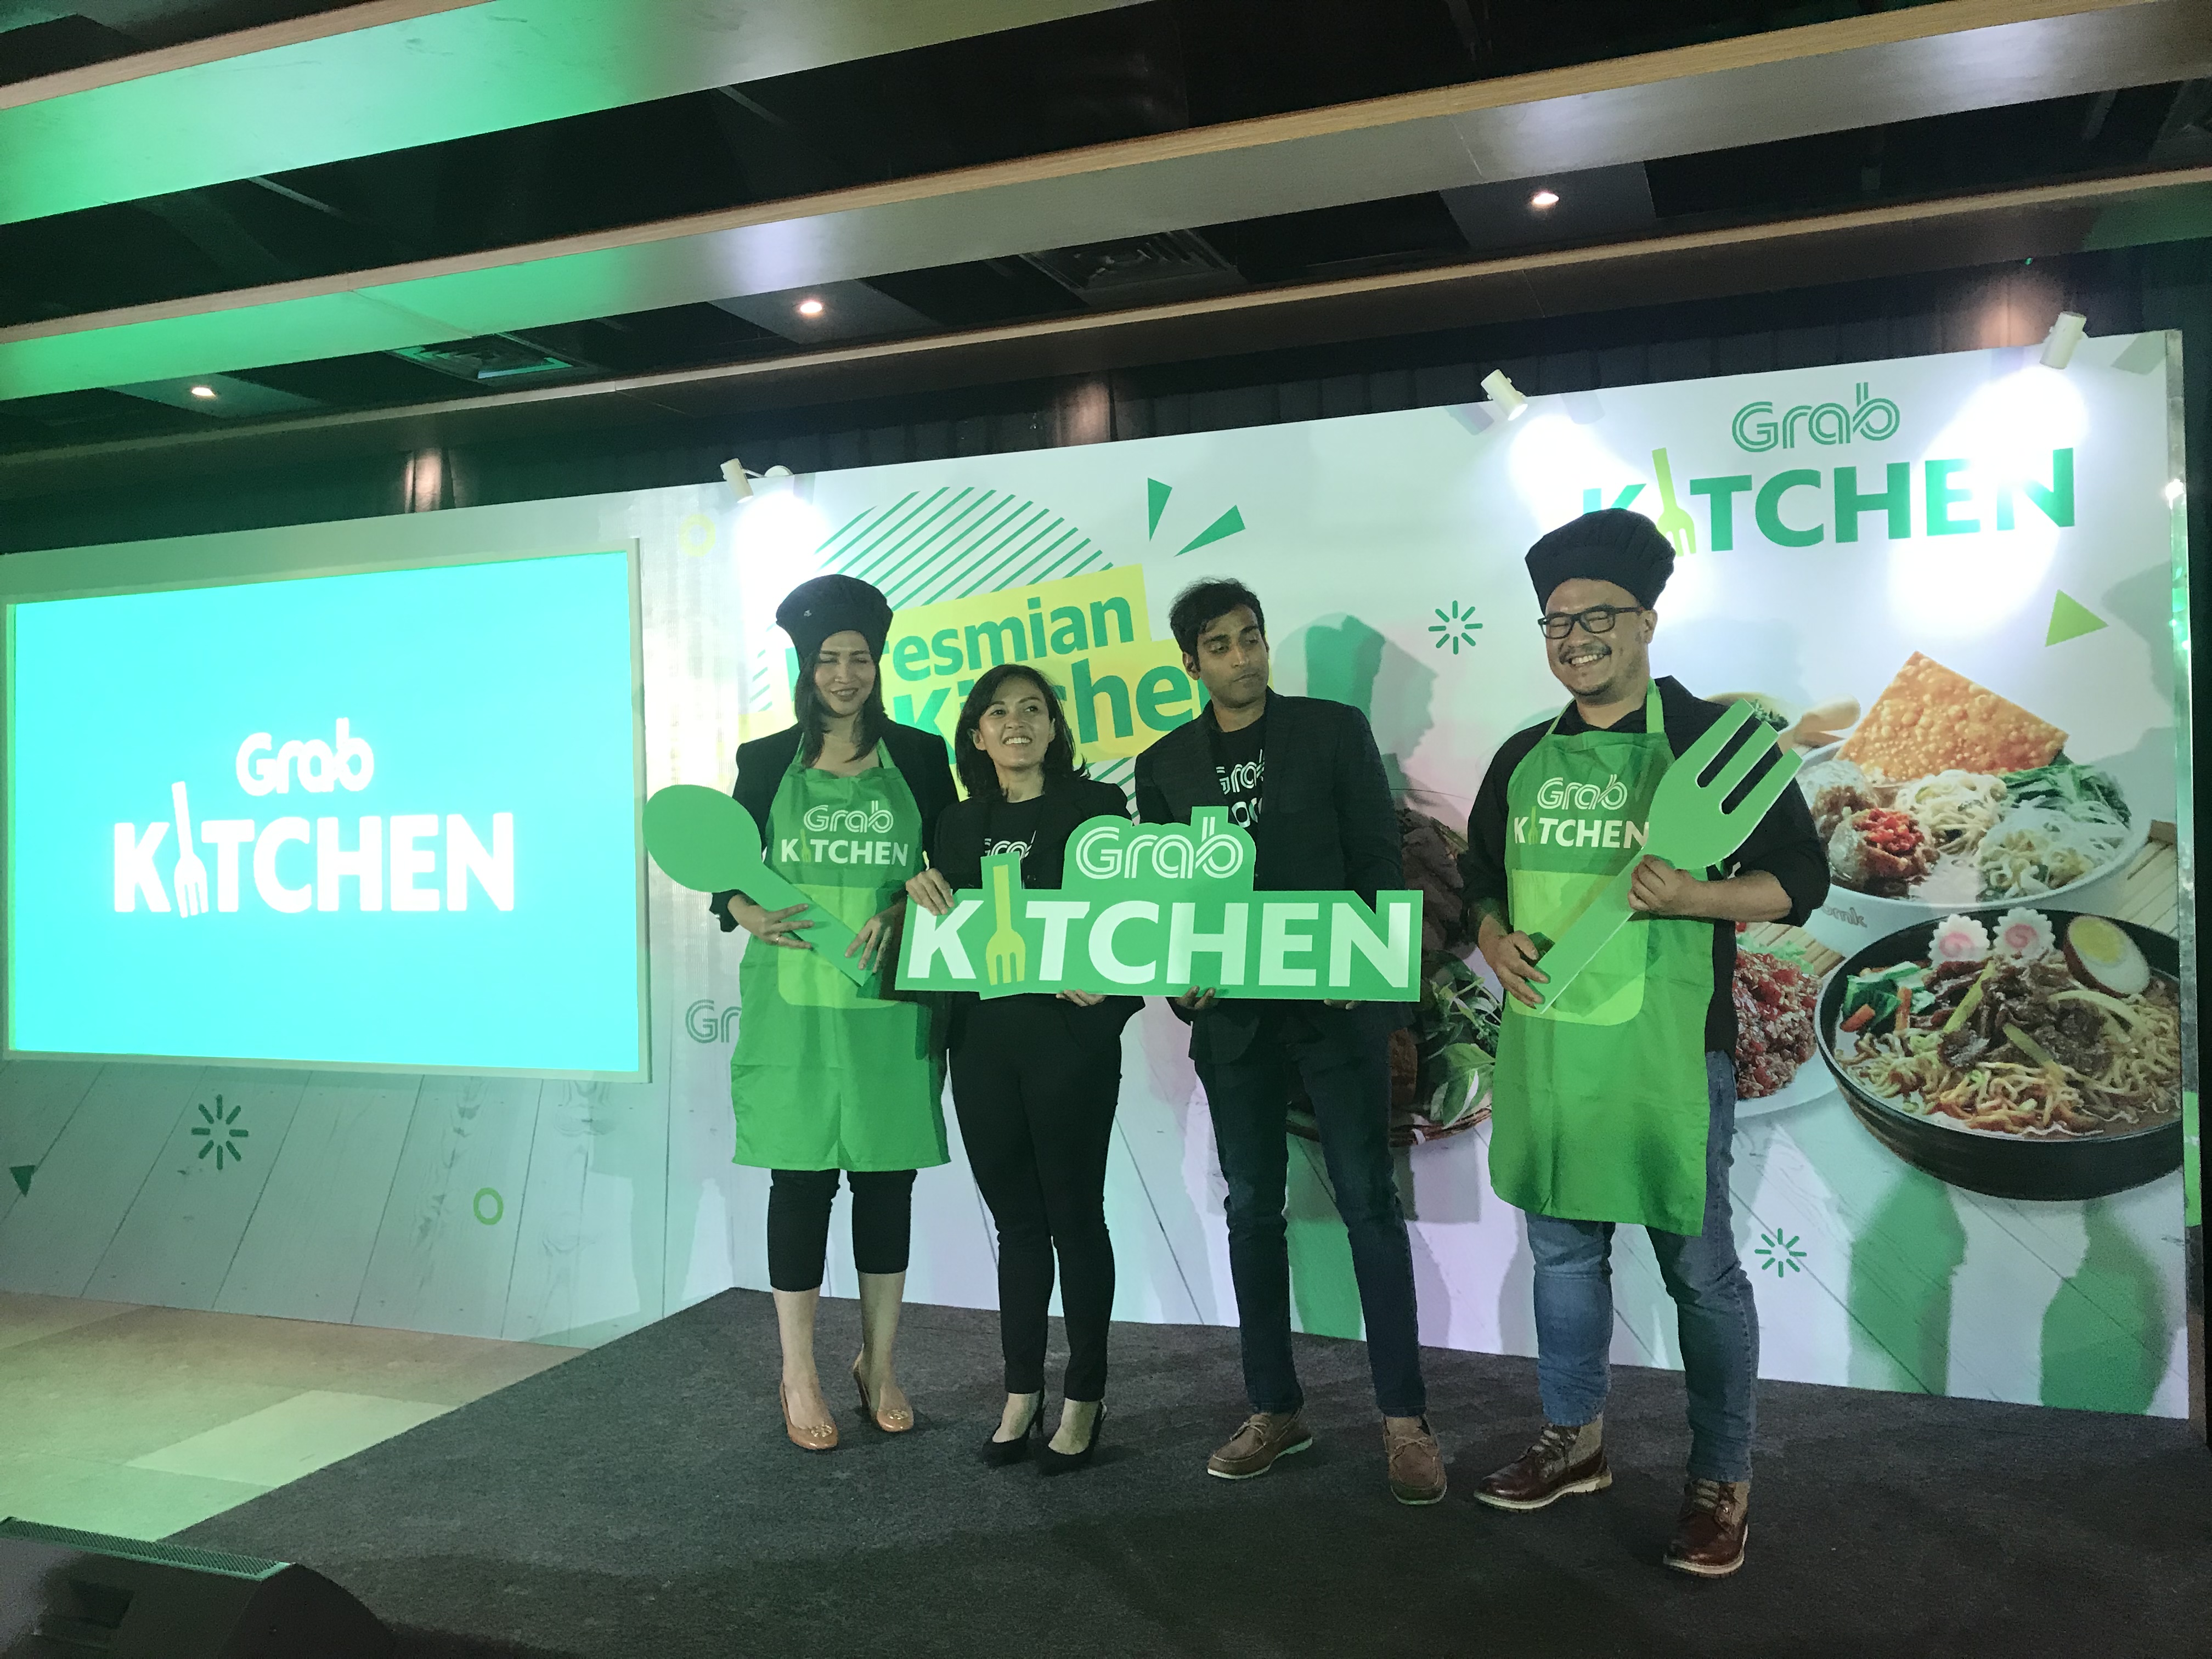 Grab plans to launch 50 GrabKitchens across Indonesia this year